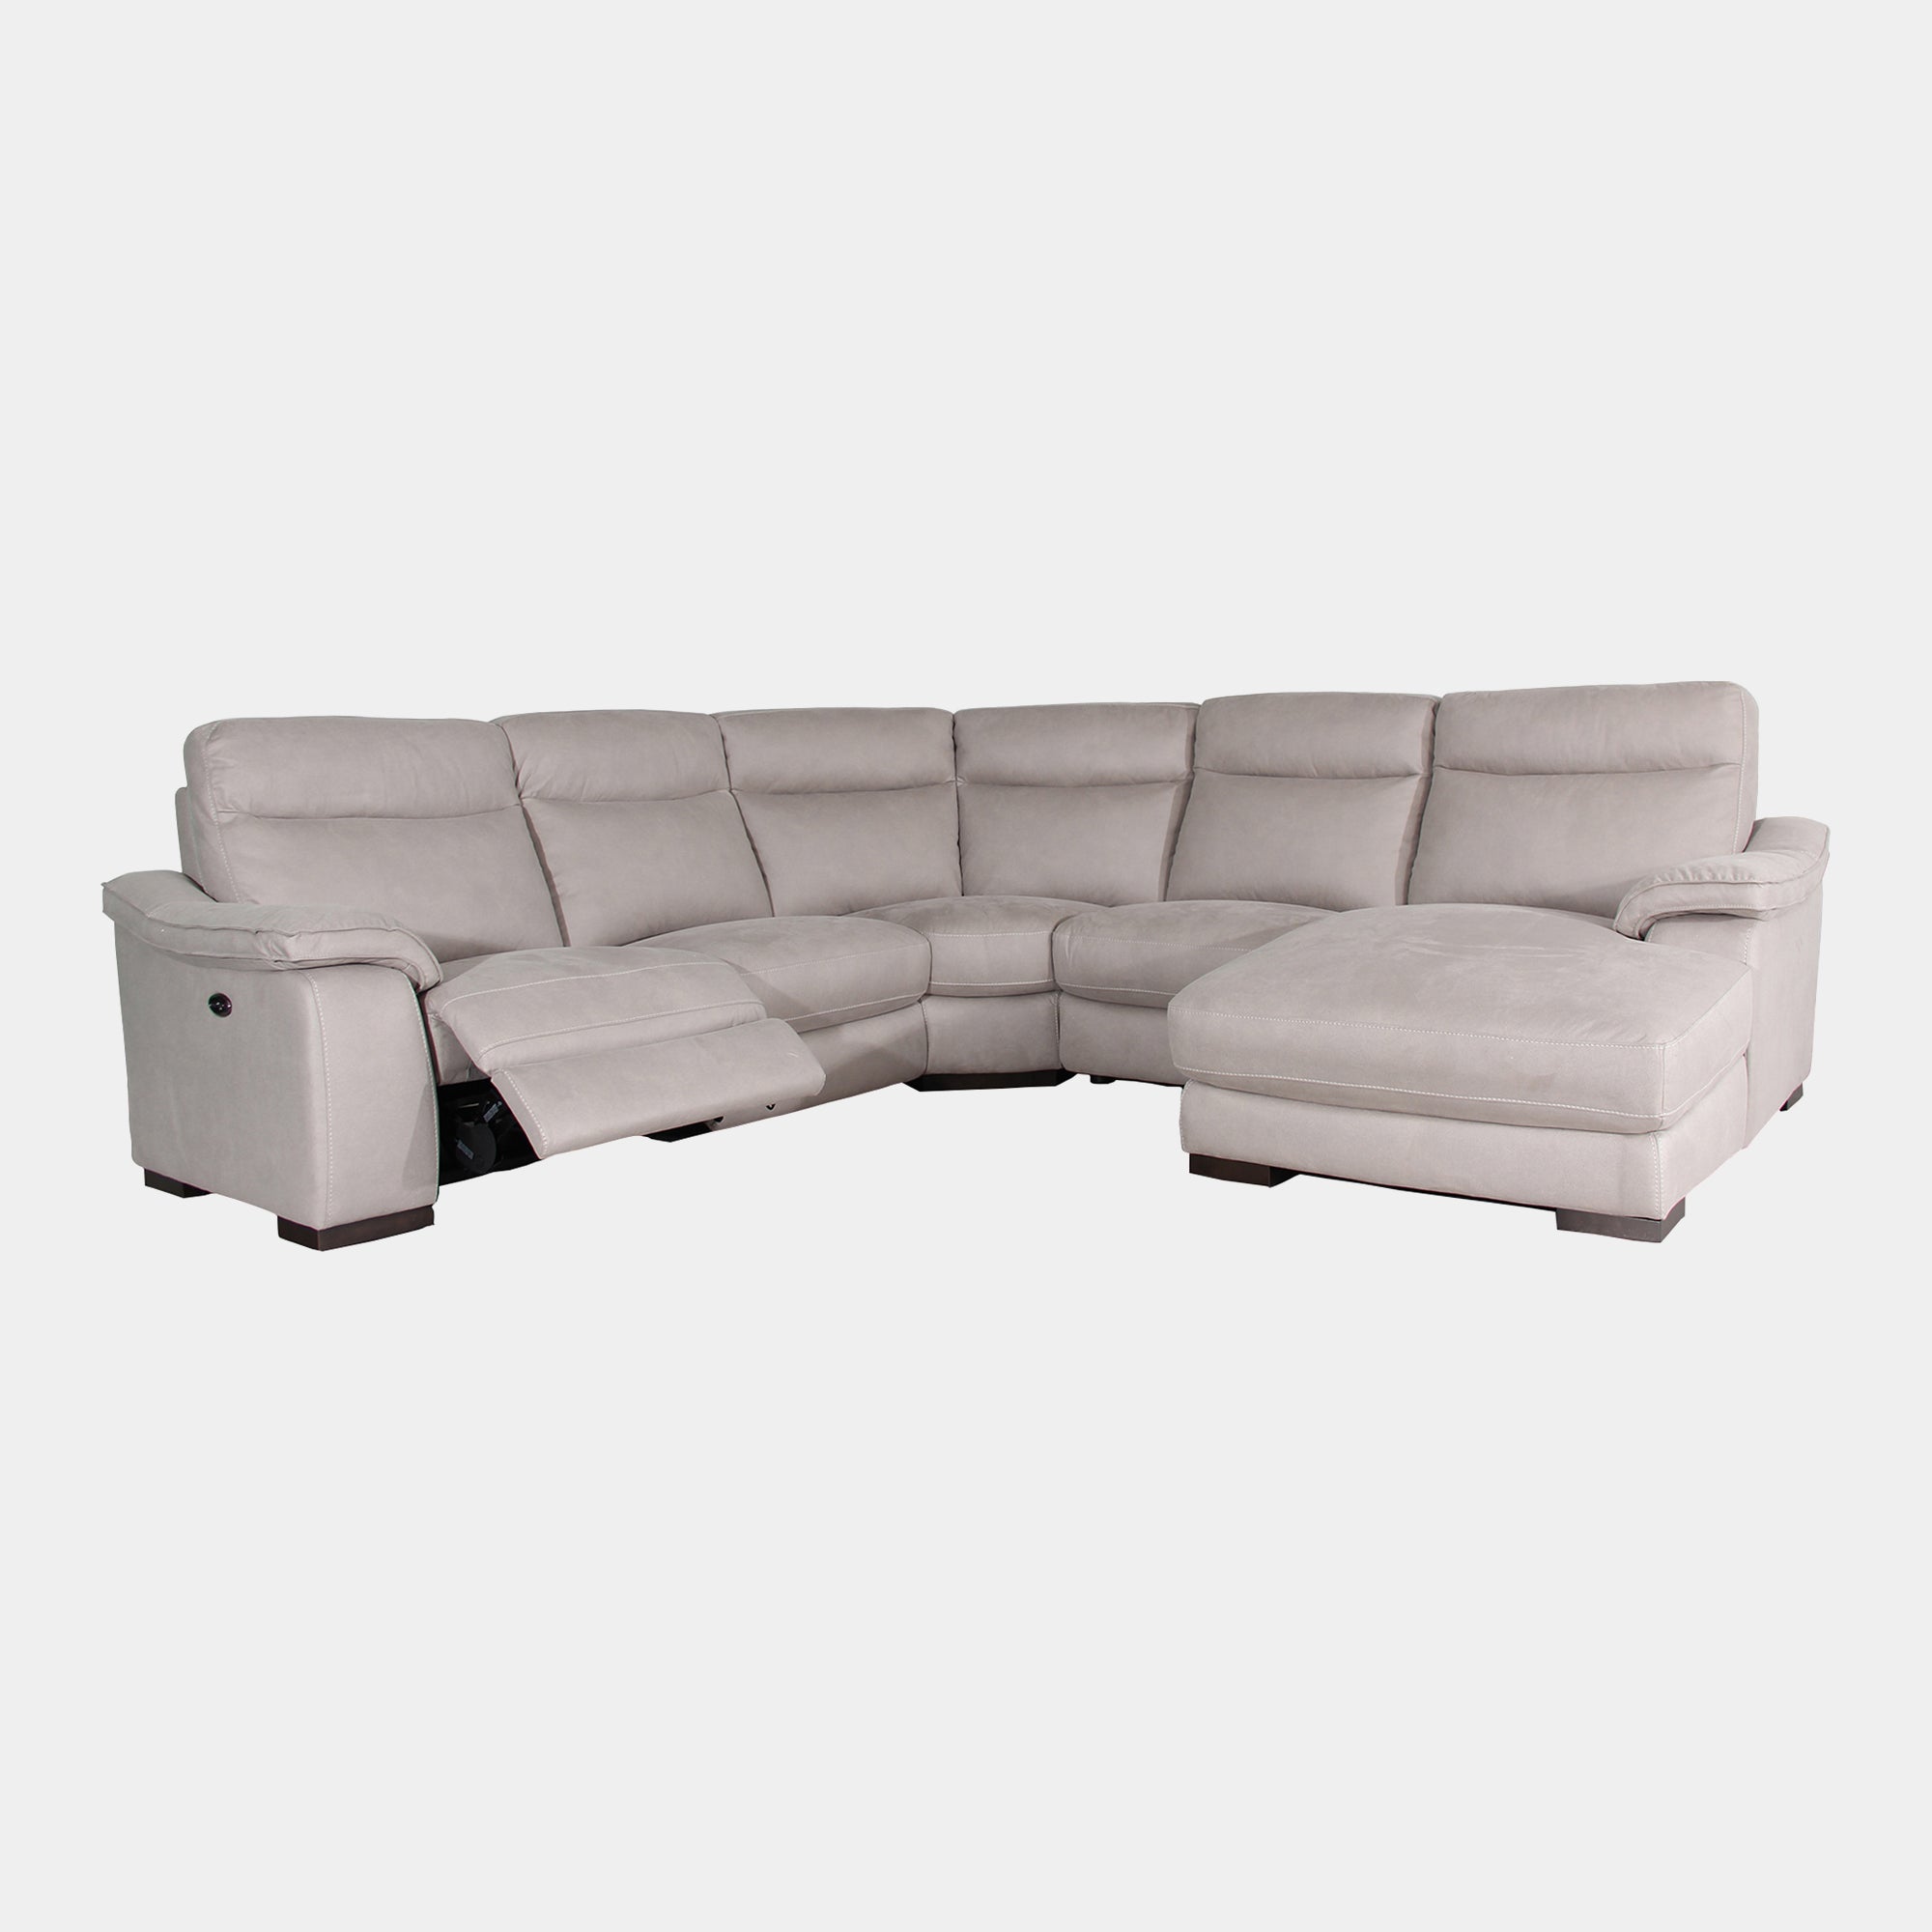 Caruso - Corner Group RHF Chaise